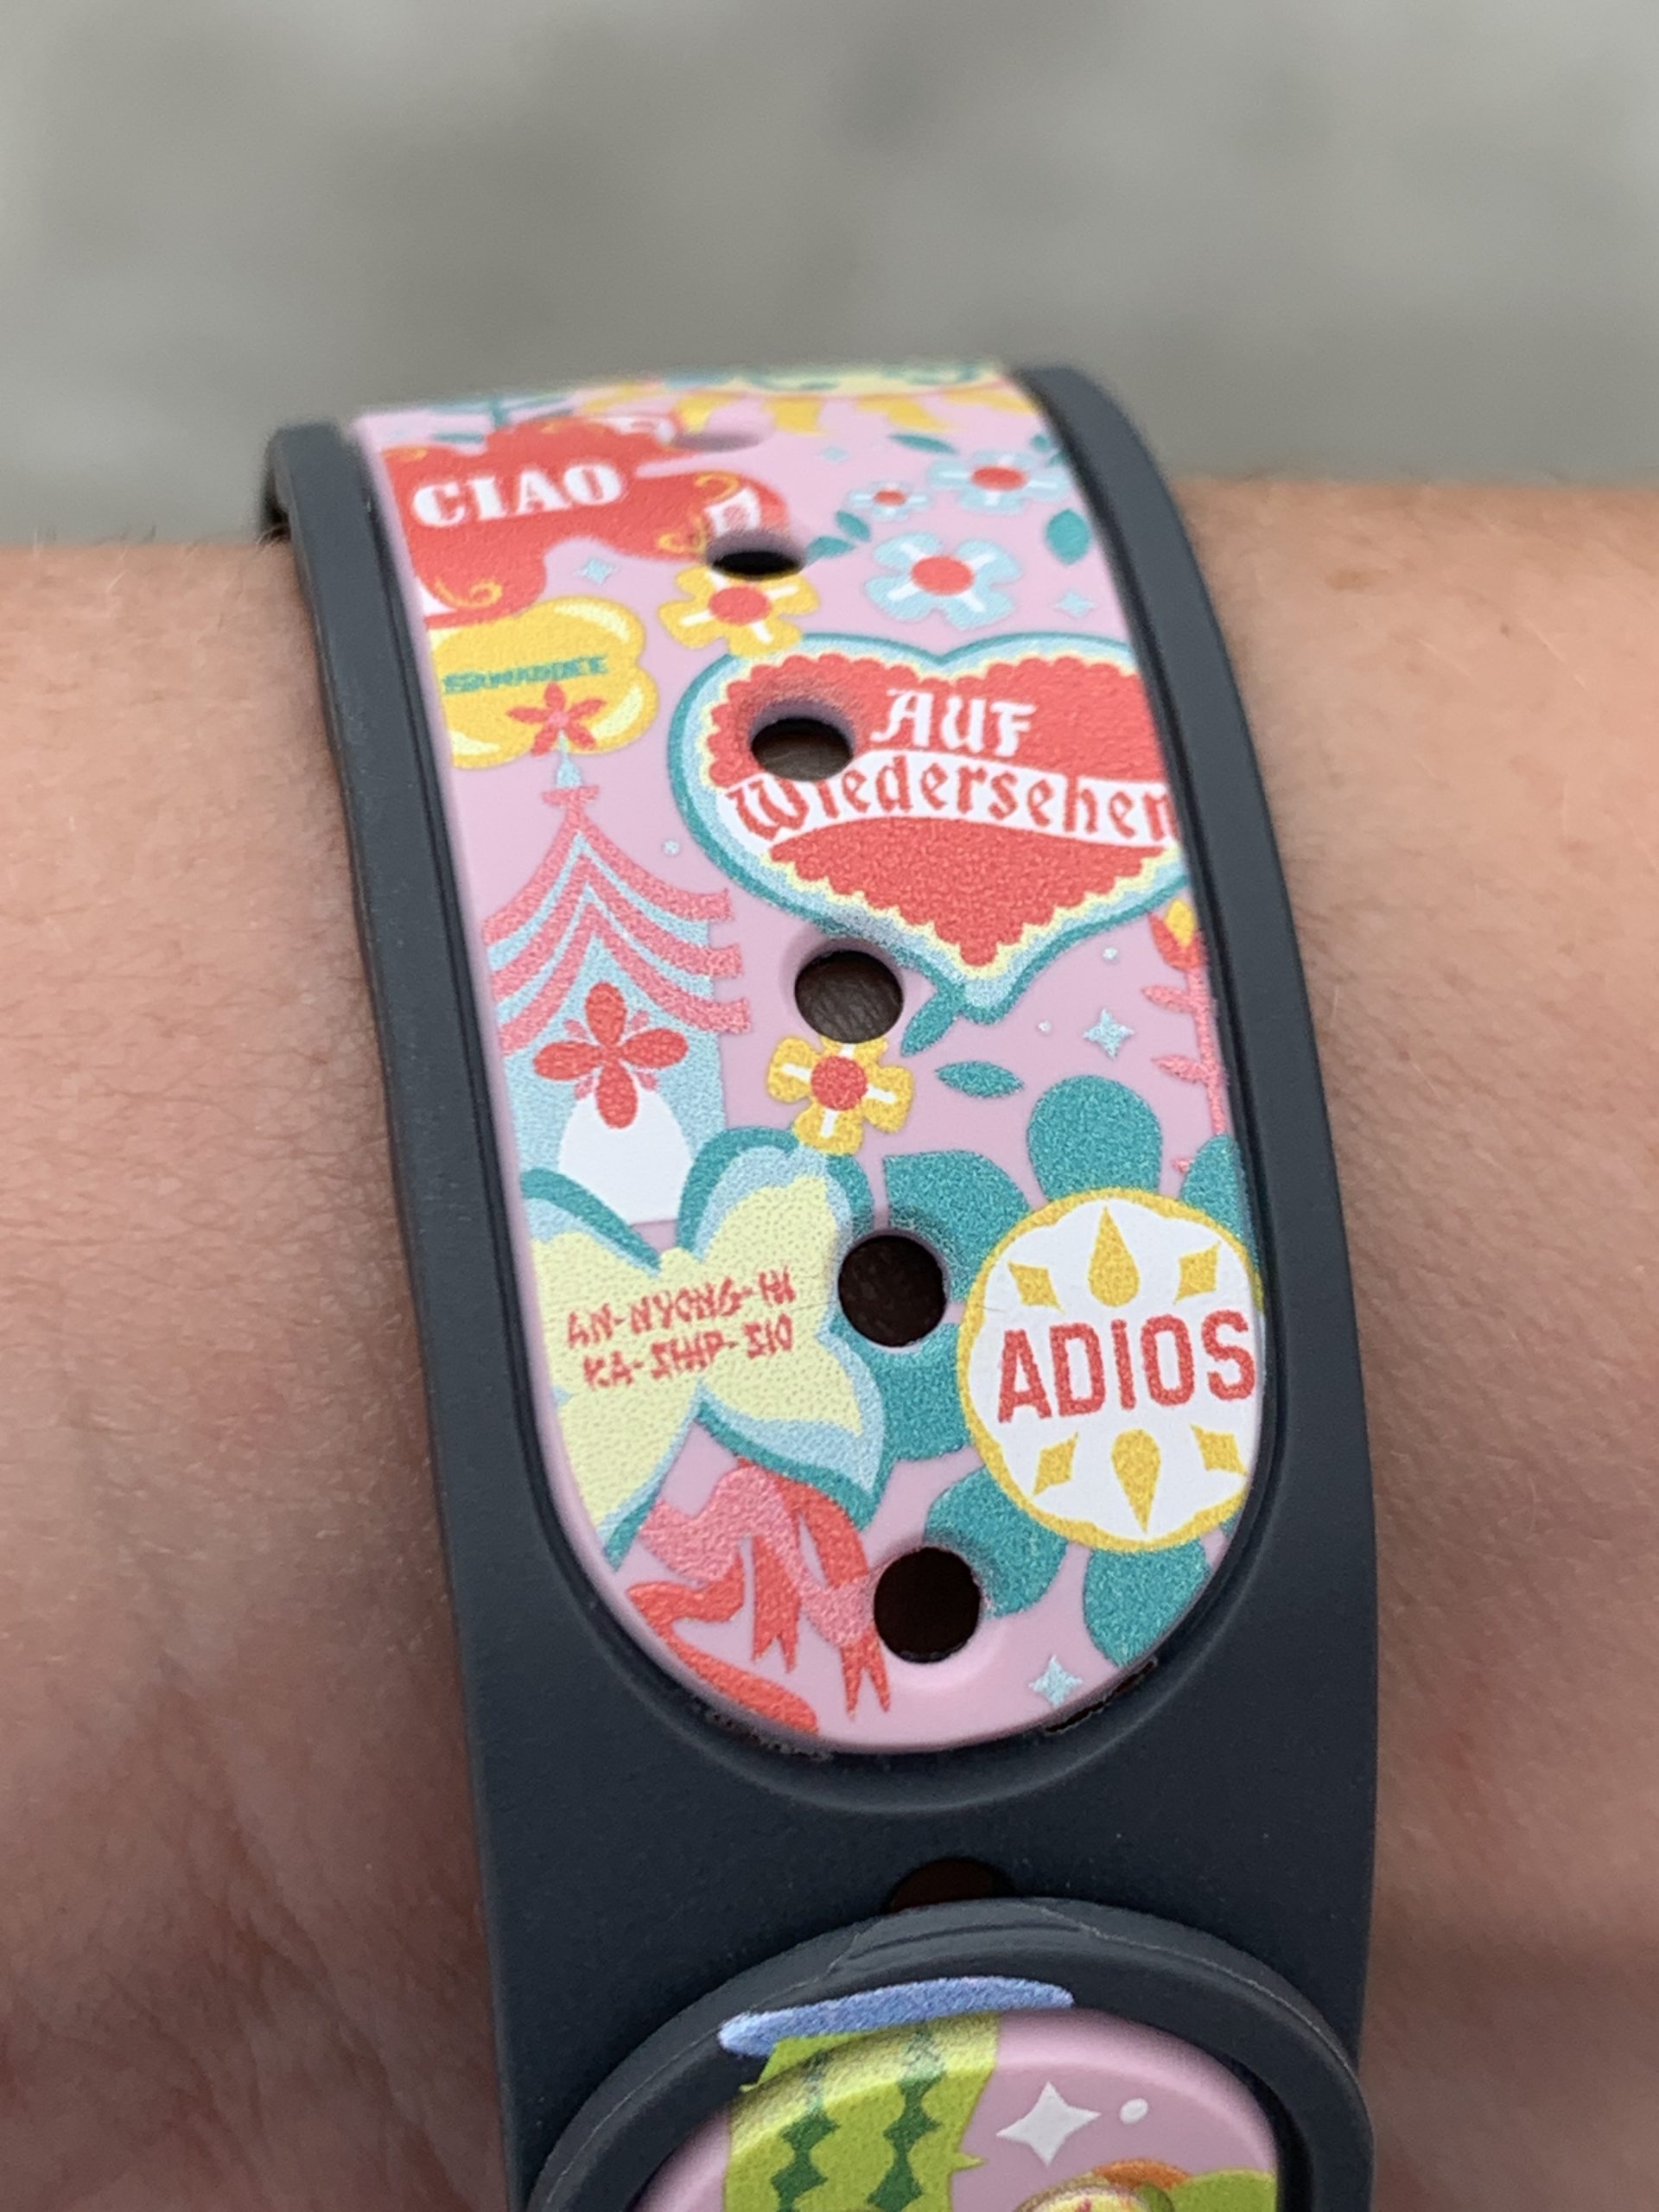 How to link MagicBands to tickets